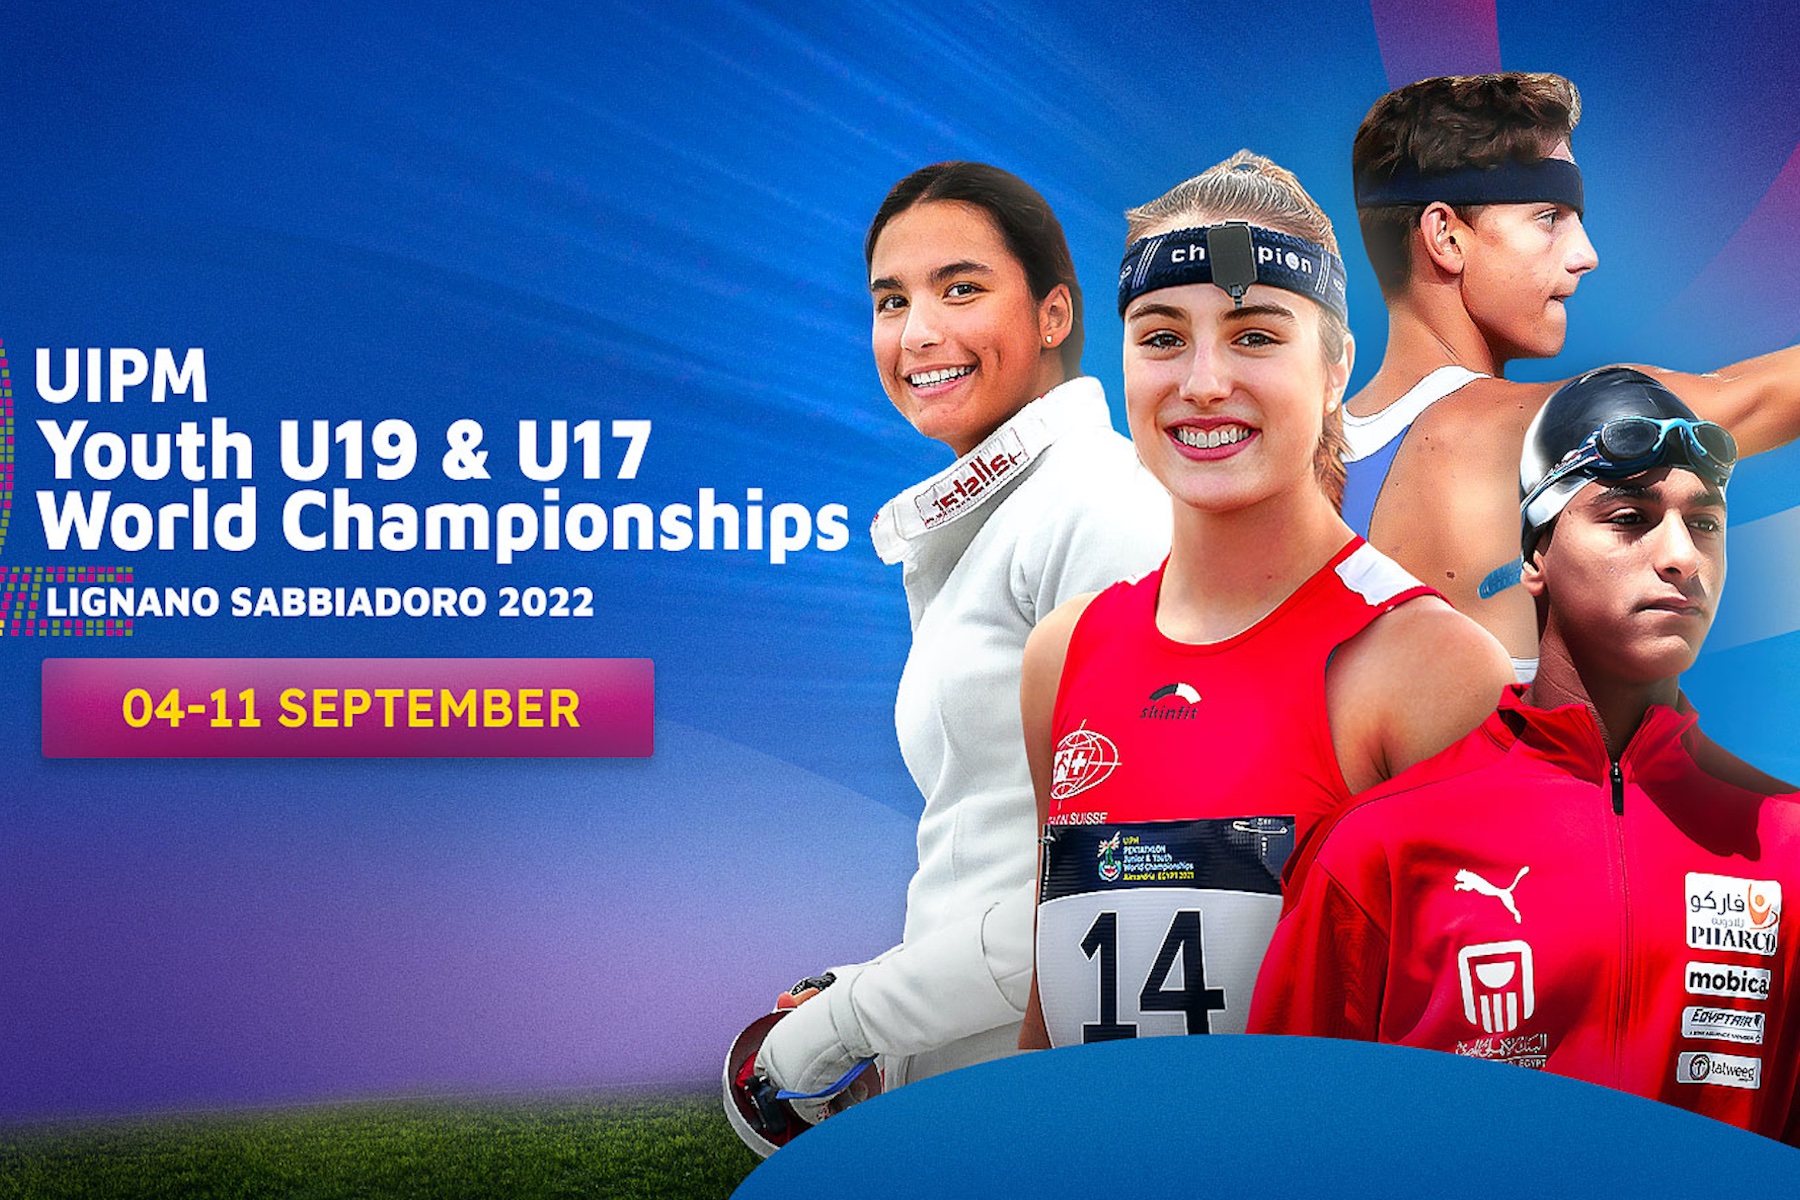 All Set For The Uipm Youth U19 & U17 World Championships in Lignano Sabbiadoro: 34 Nations Registered and 250 Athletes, Elena Micheli Patroness Of The Event